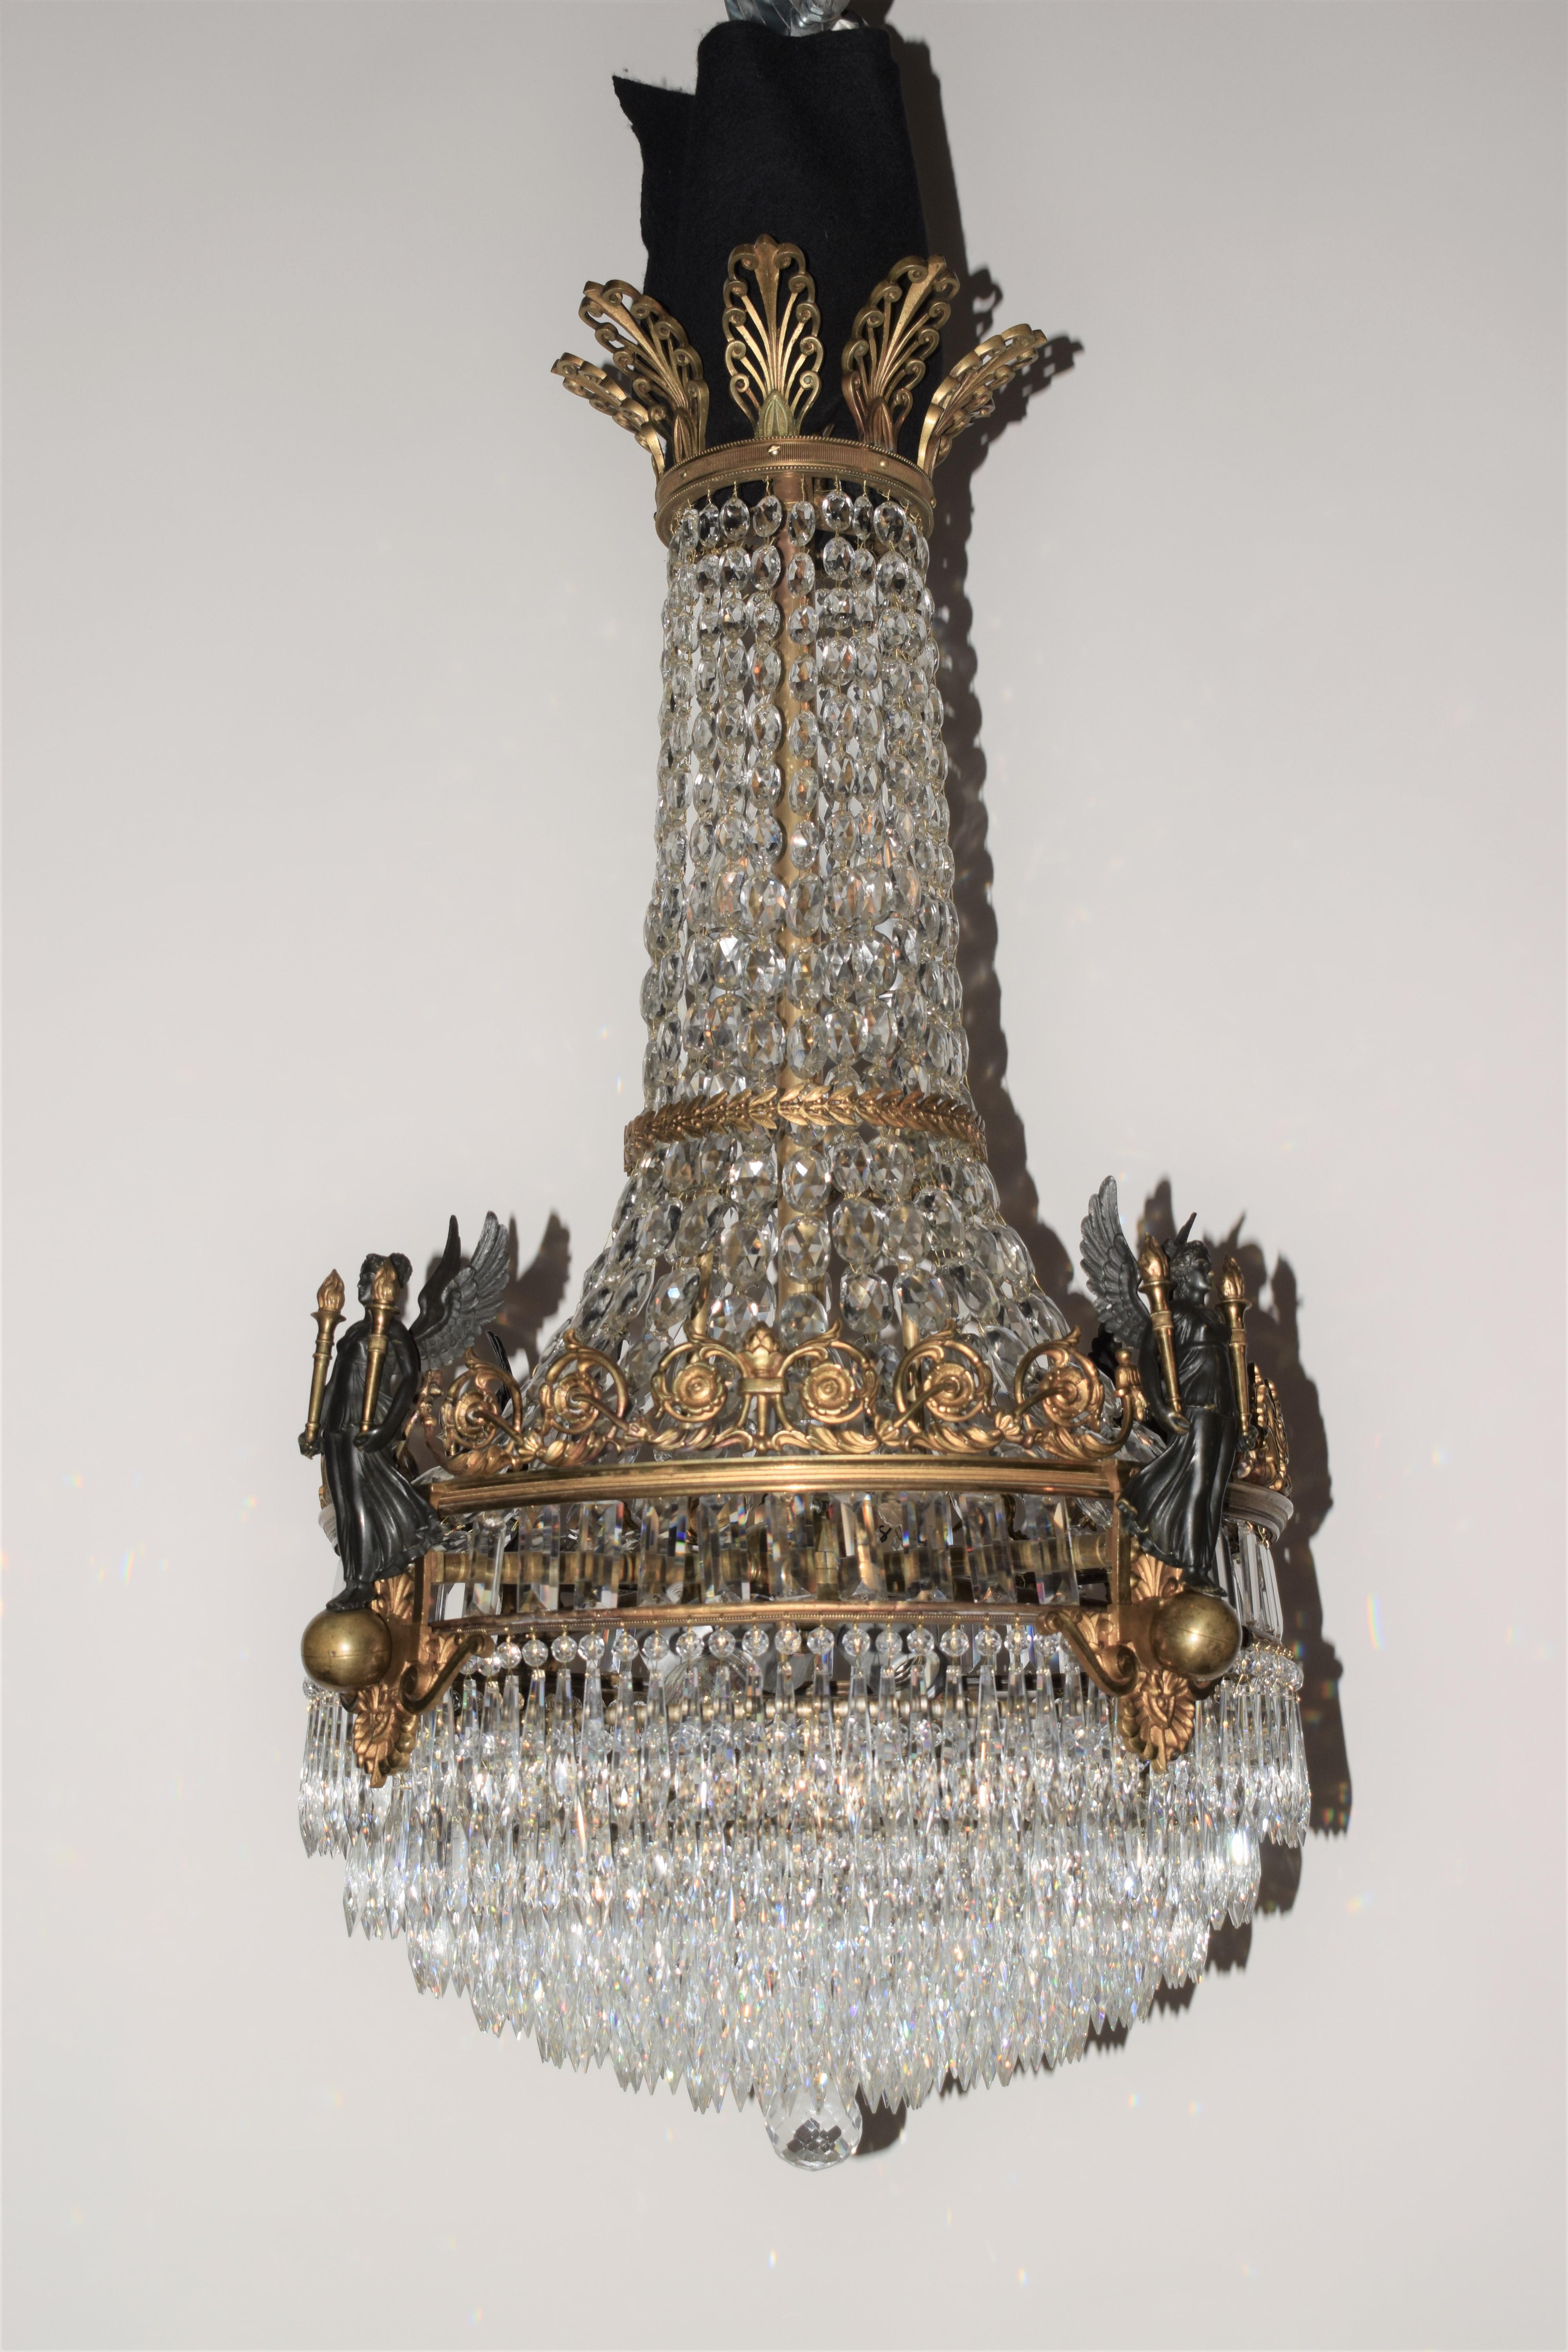 A Superb gilt bronze & crystal Empire style Chandelier. Top ring featuring anthemia. Main ring with winged deity carrying gilt torcheres. The bottom part consists of seven concentric circles of faceted drops. France, circa 1910
CW4938.